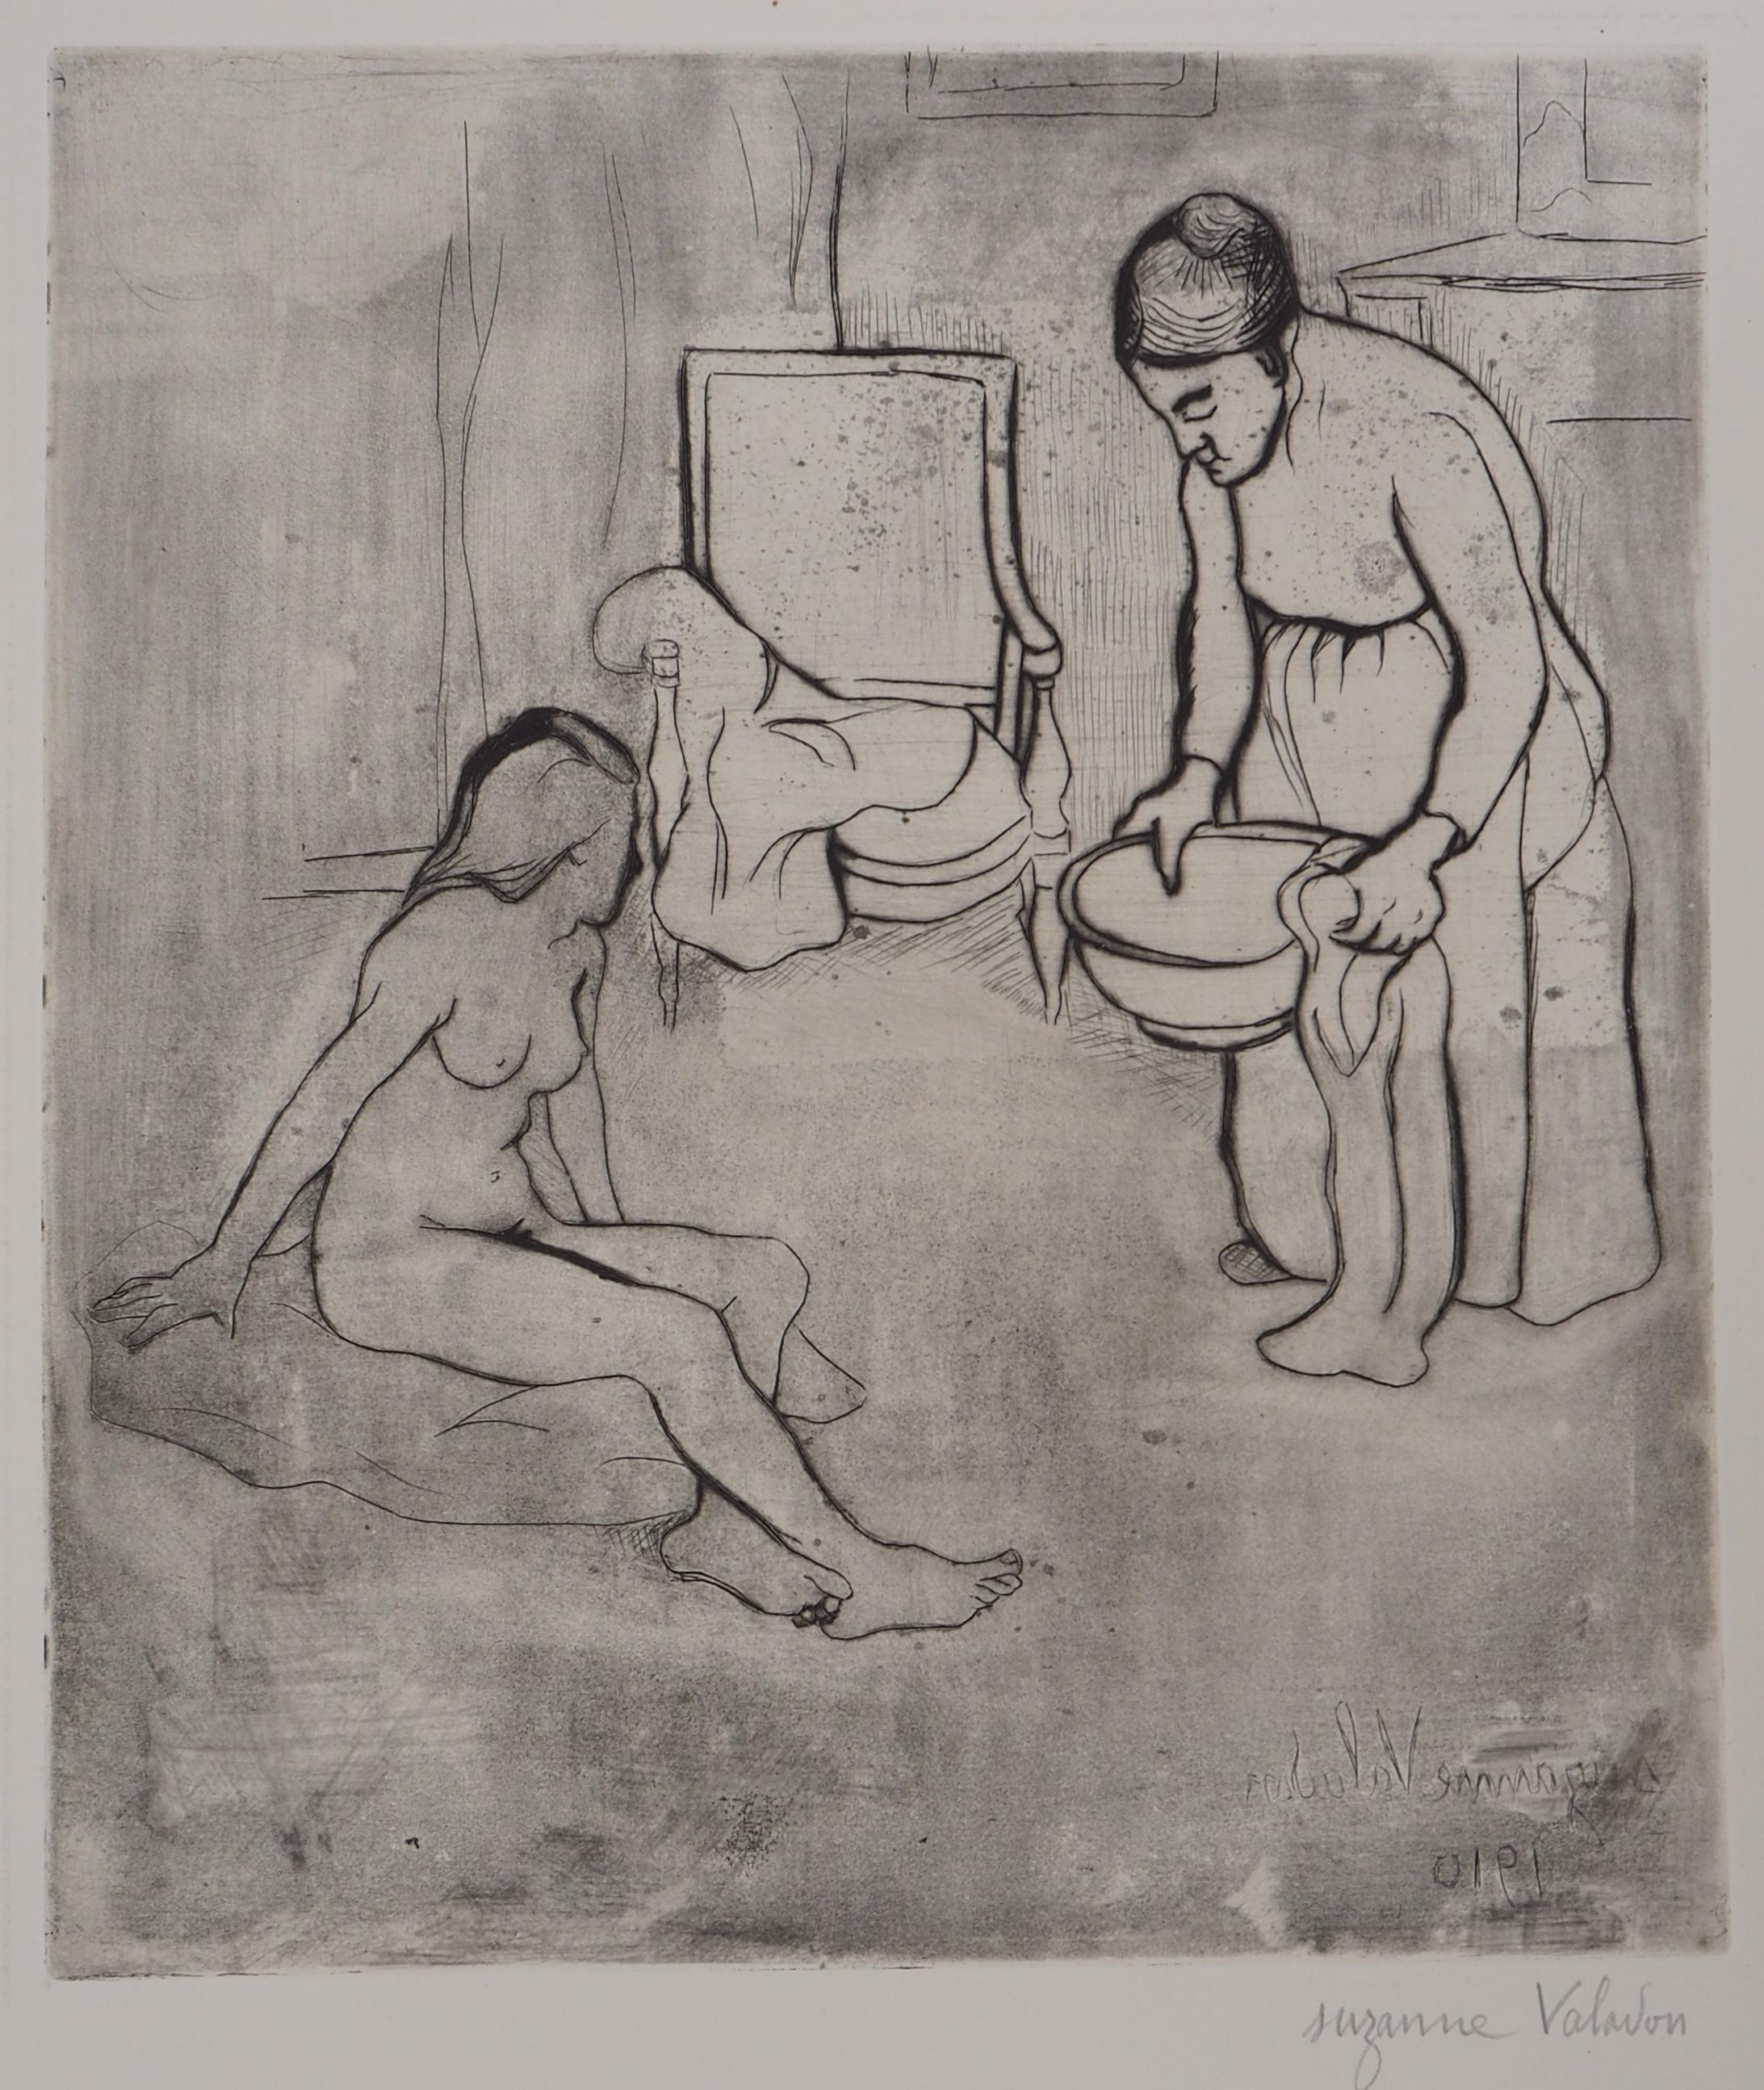 Suzanne Valadon Nude Print - Grandmother and Nude Louise - Original handsigned etching 